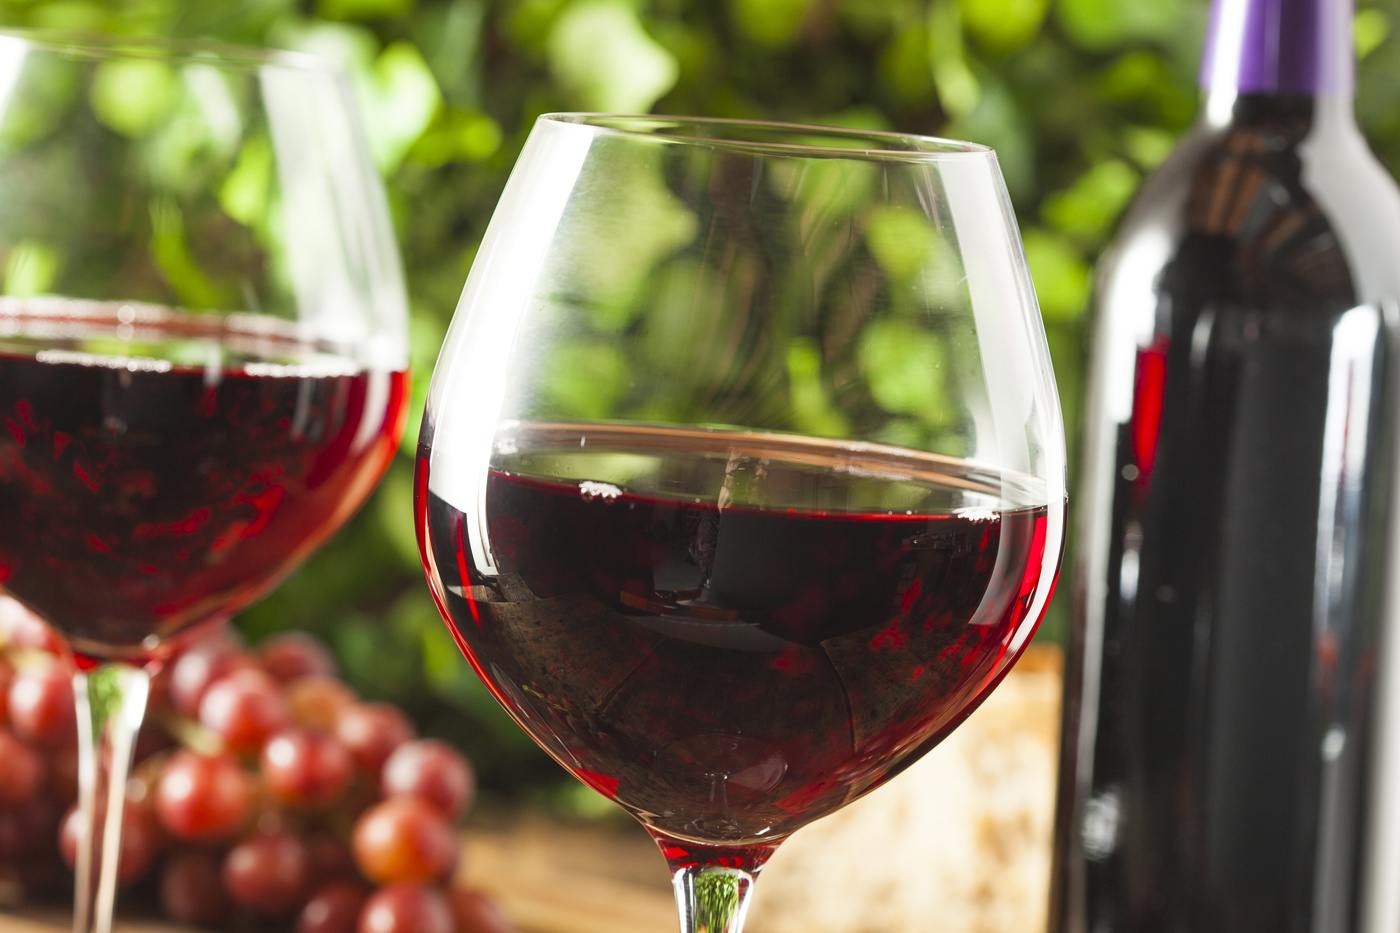 Drinking red wine may help you lose weight, say studies